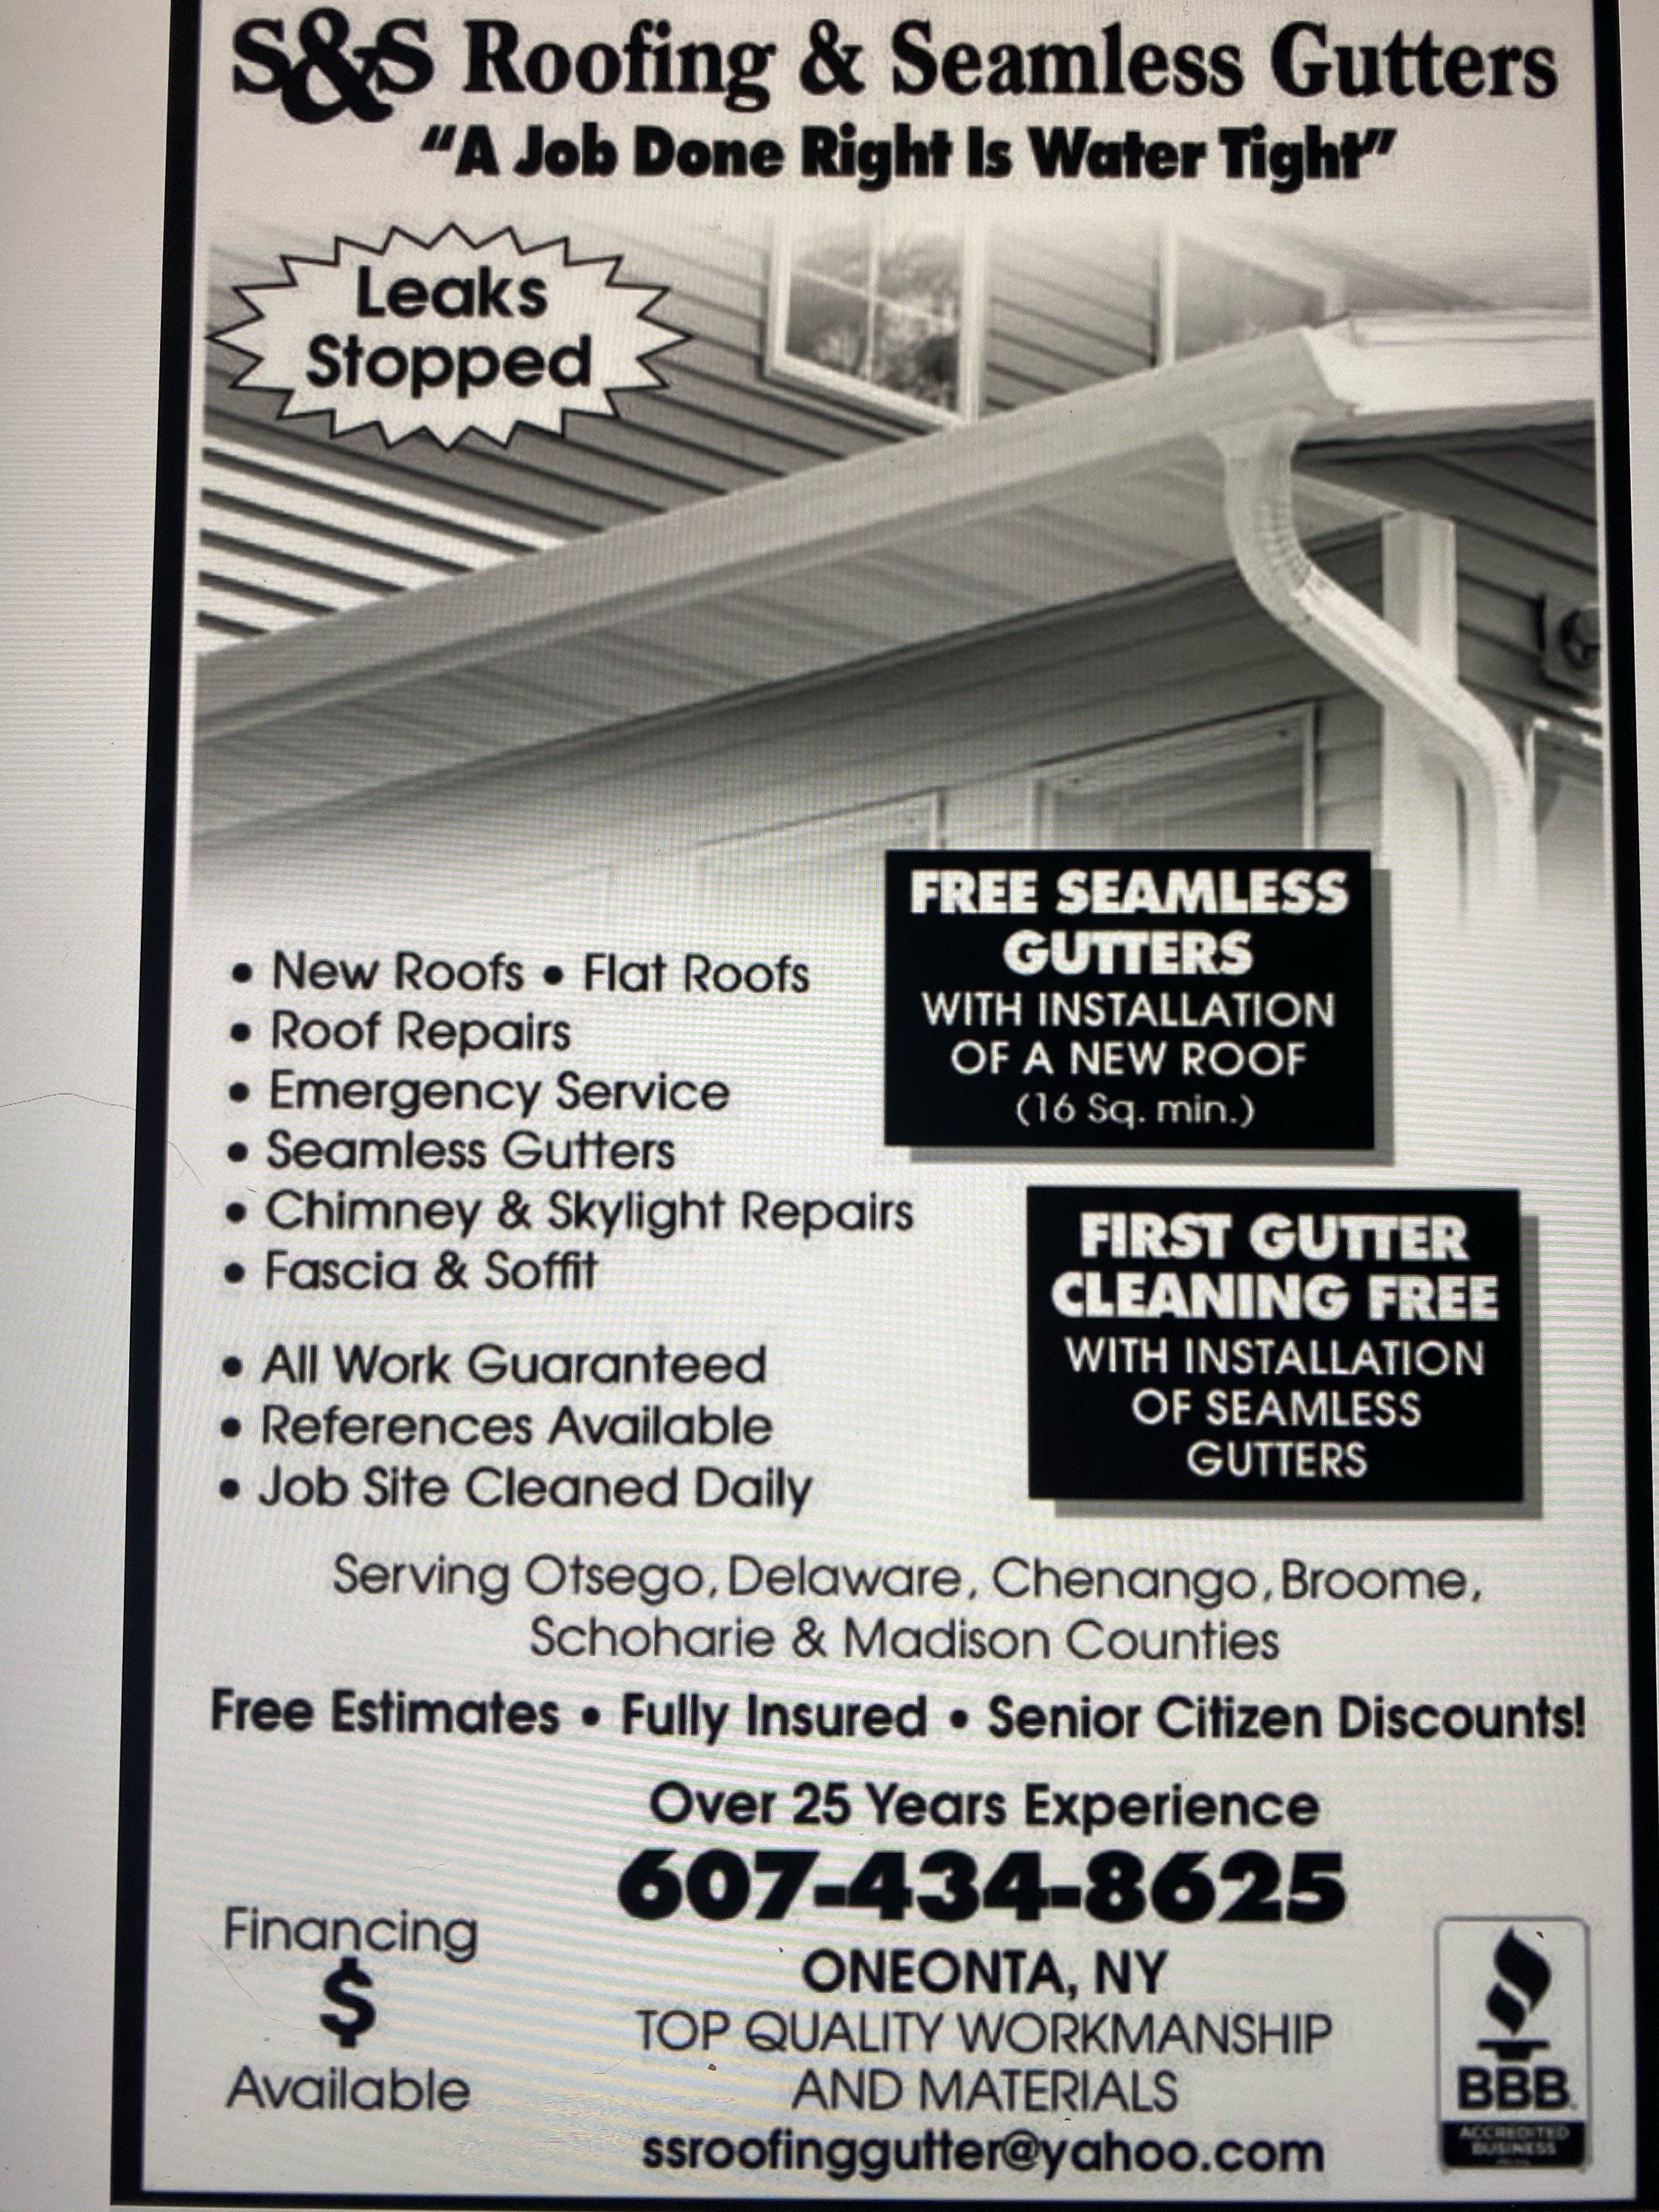 S&S Roofing & Seamless Gutters Logo